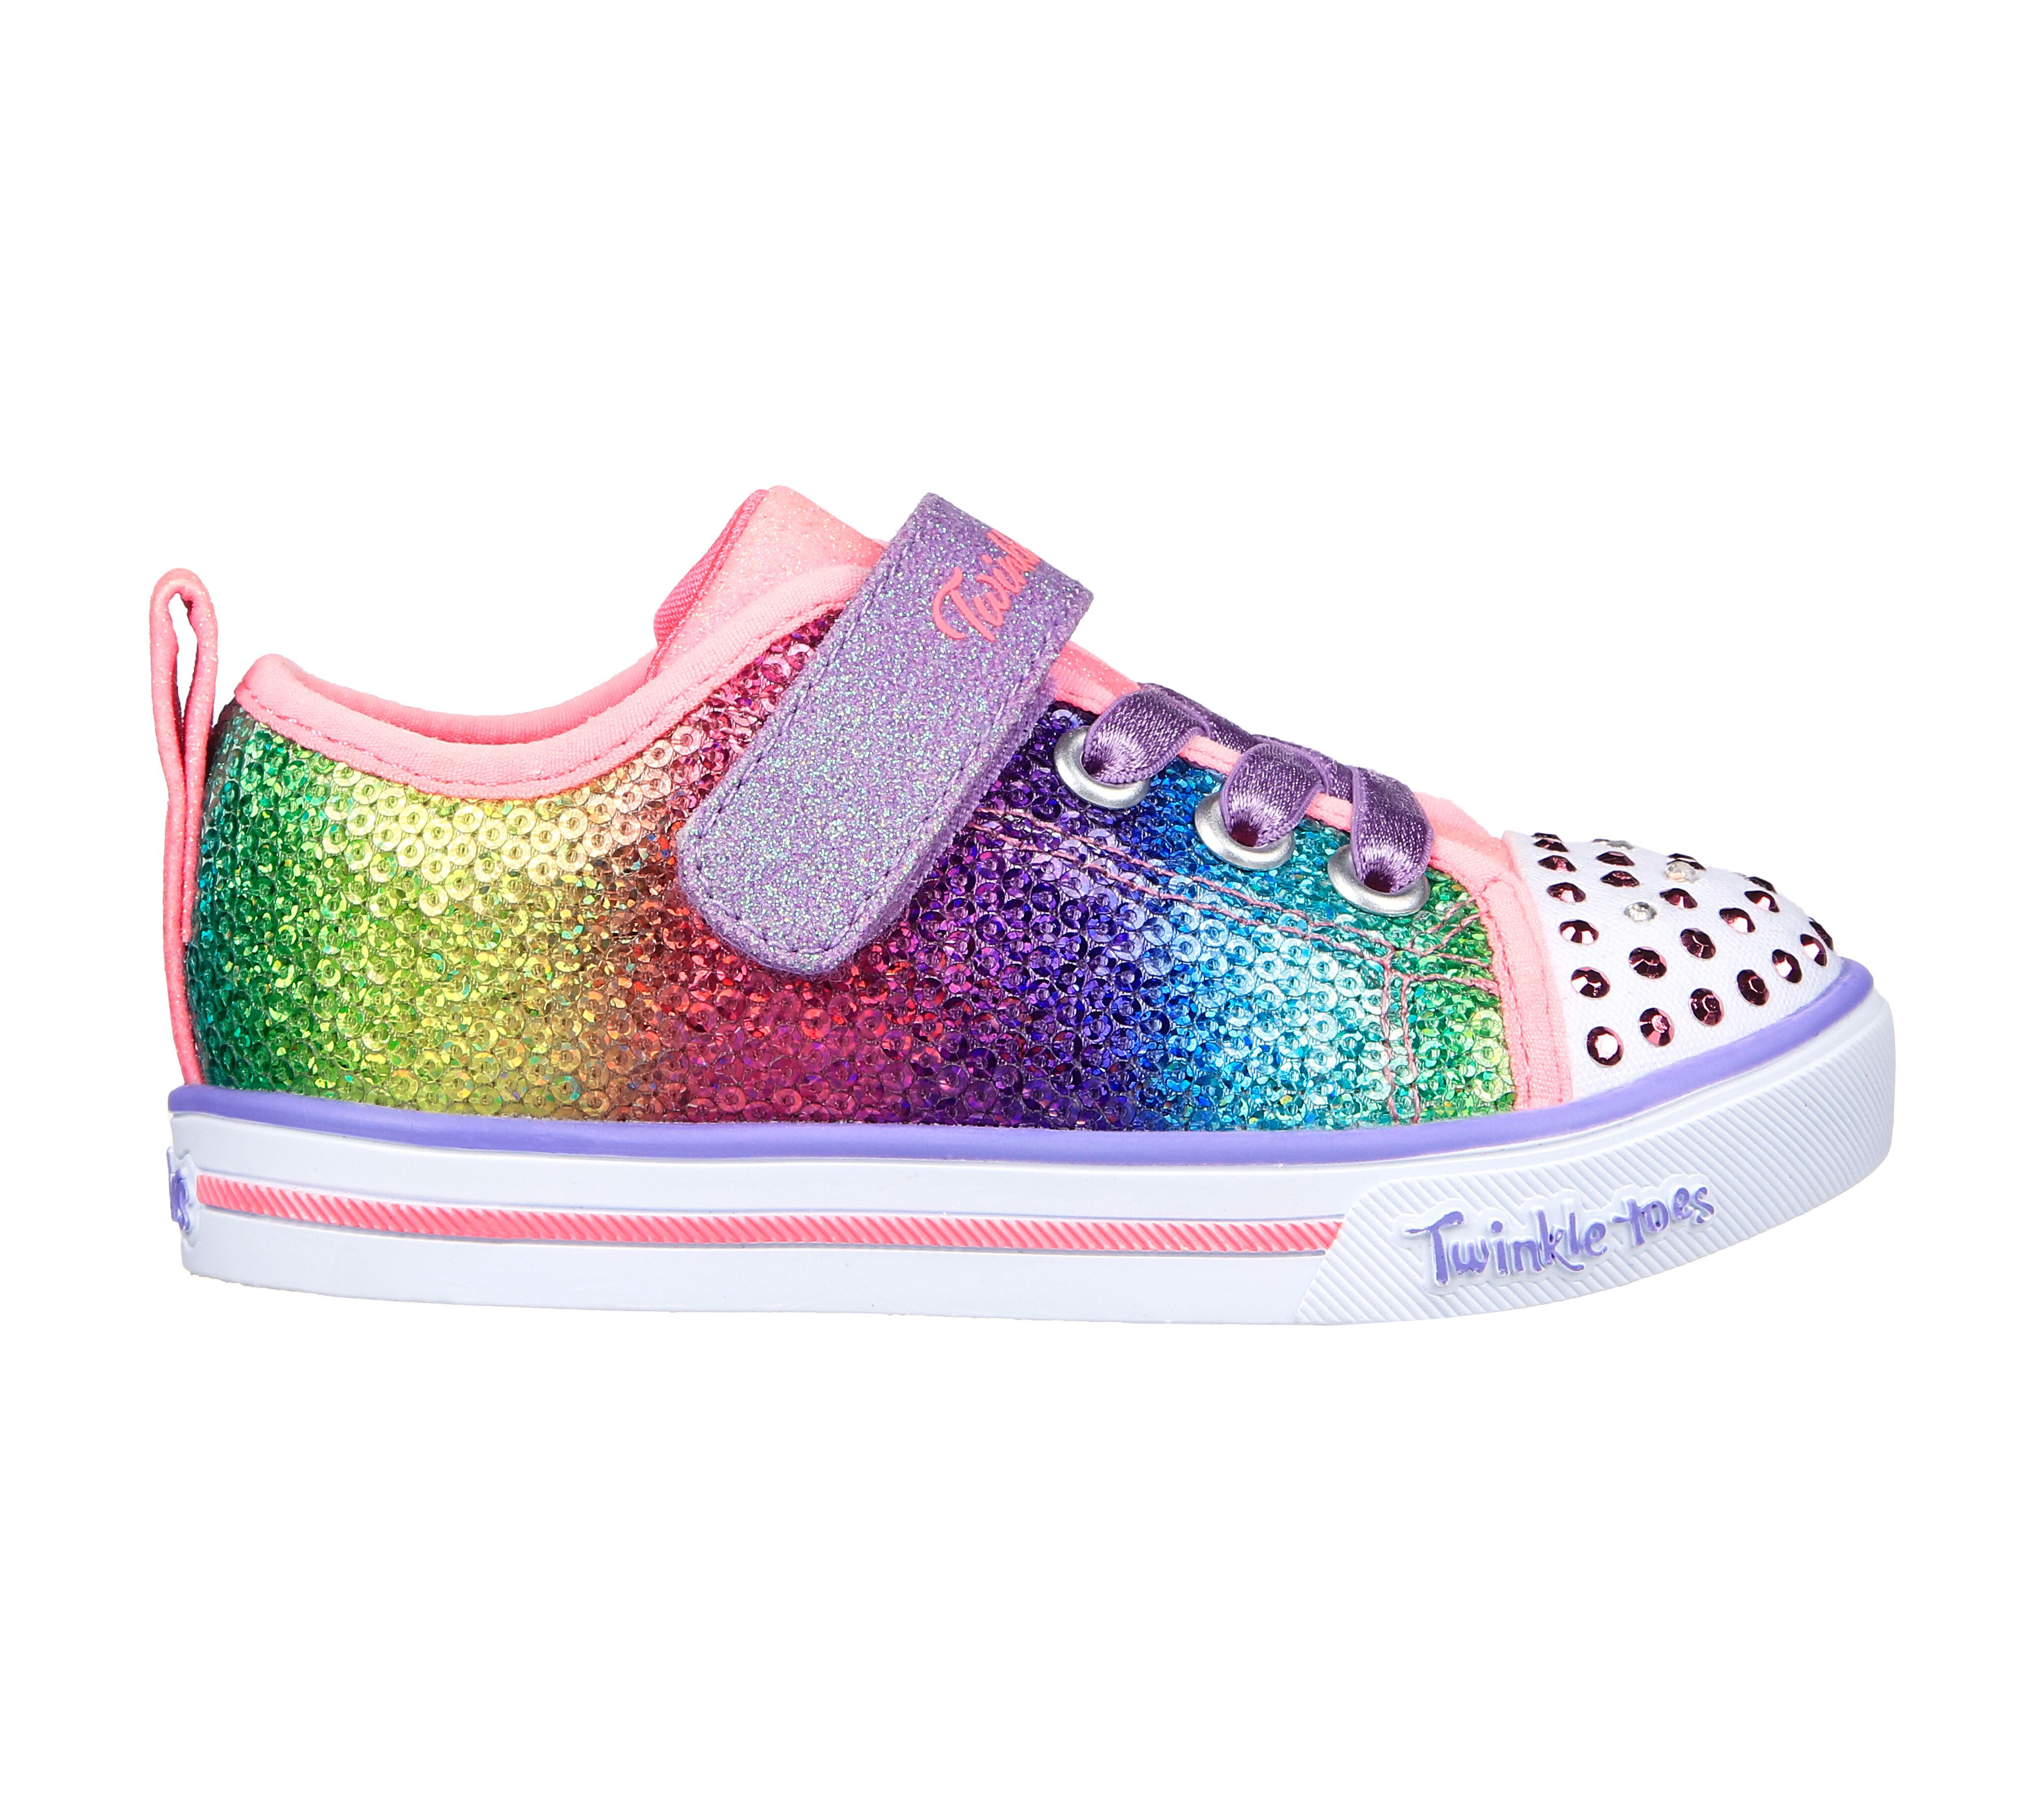 skechers twinkle toes where to buy